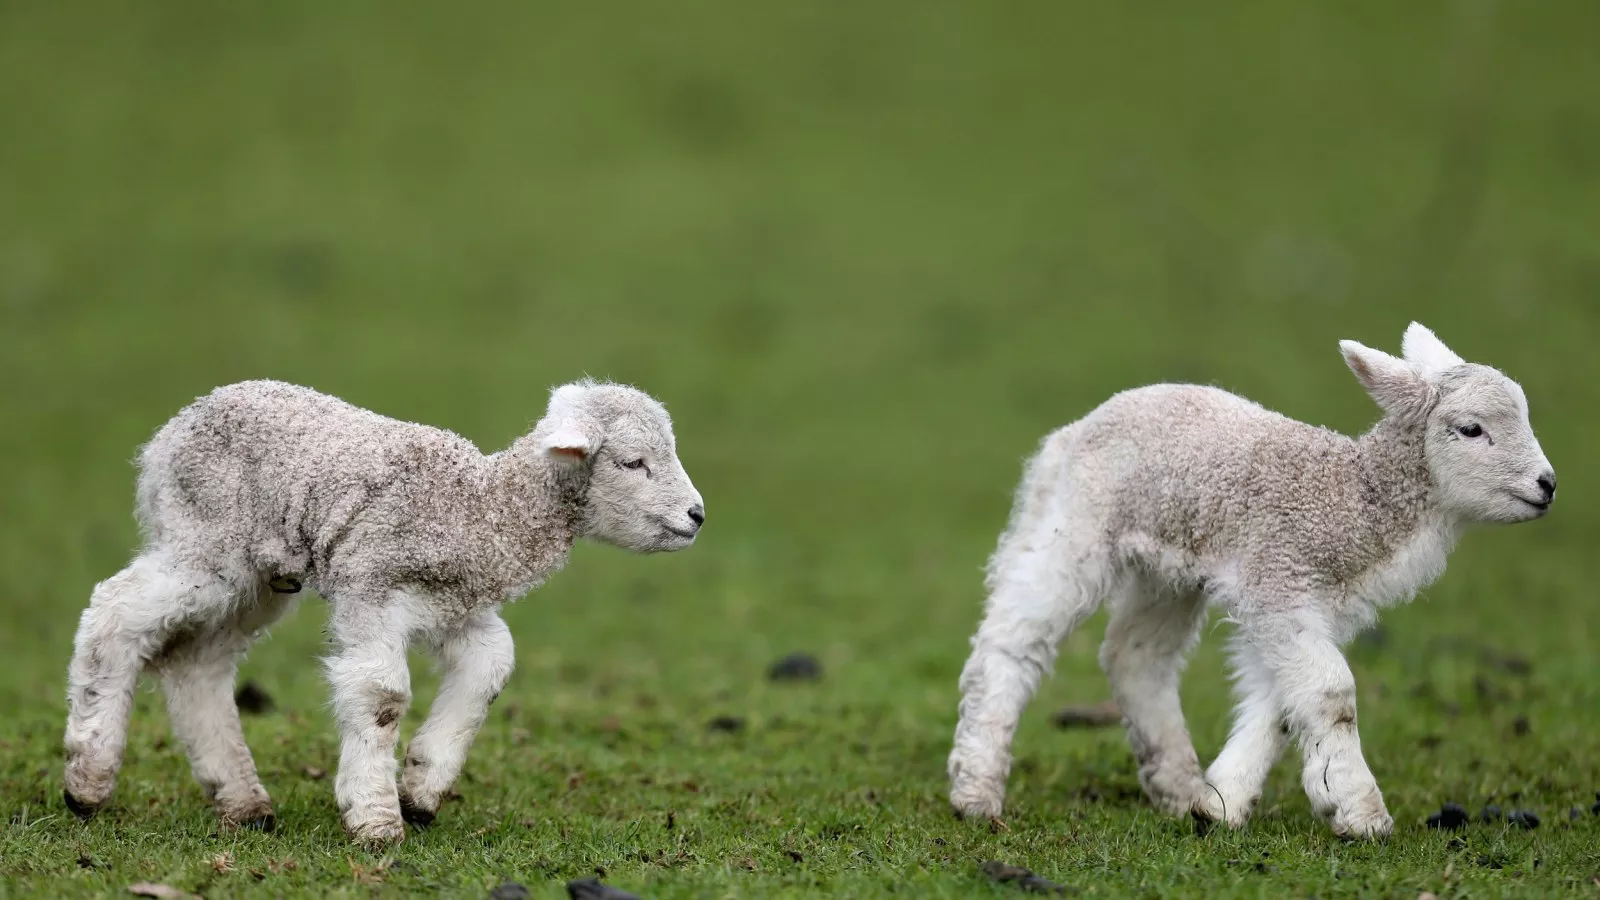 Chatty Newborn Lamb Steals Hearts With Adorable Clip Viewed Over 6M Times